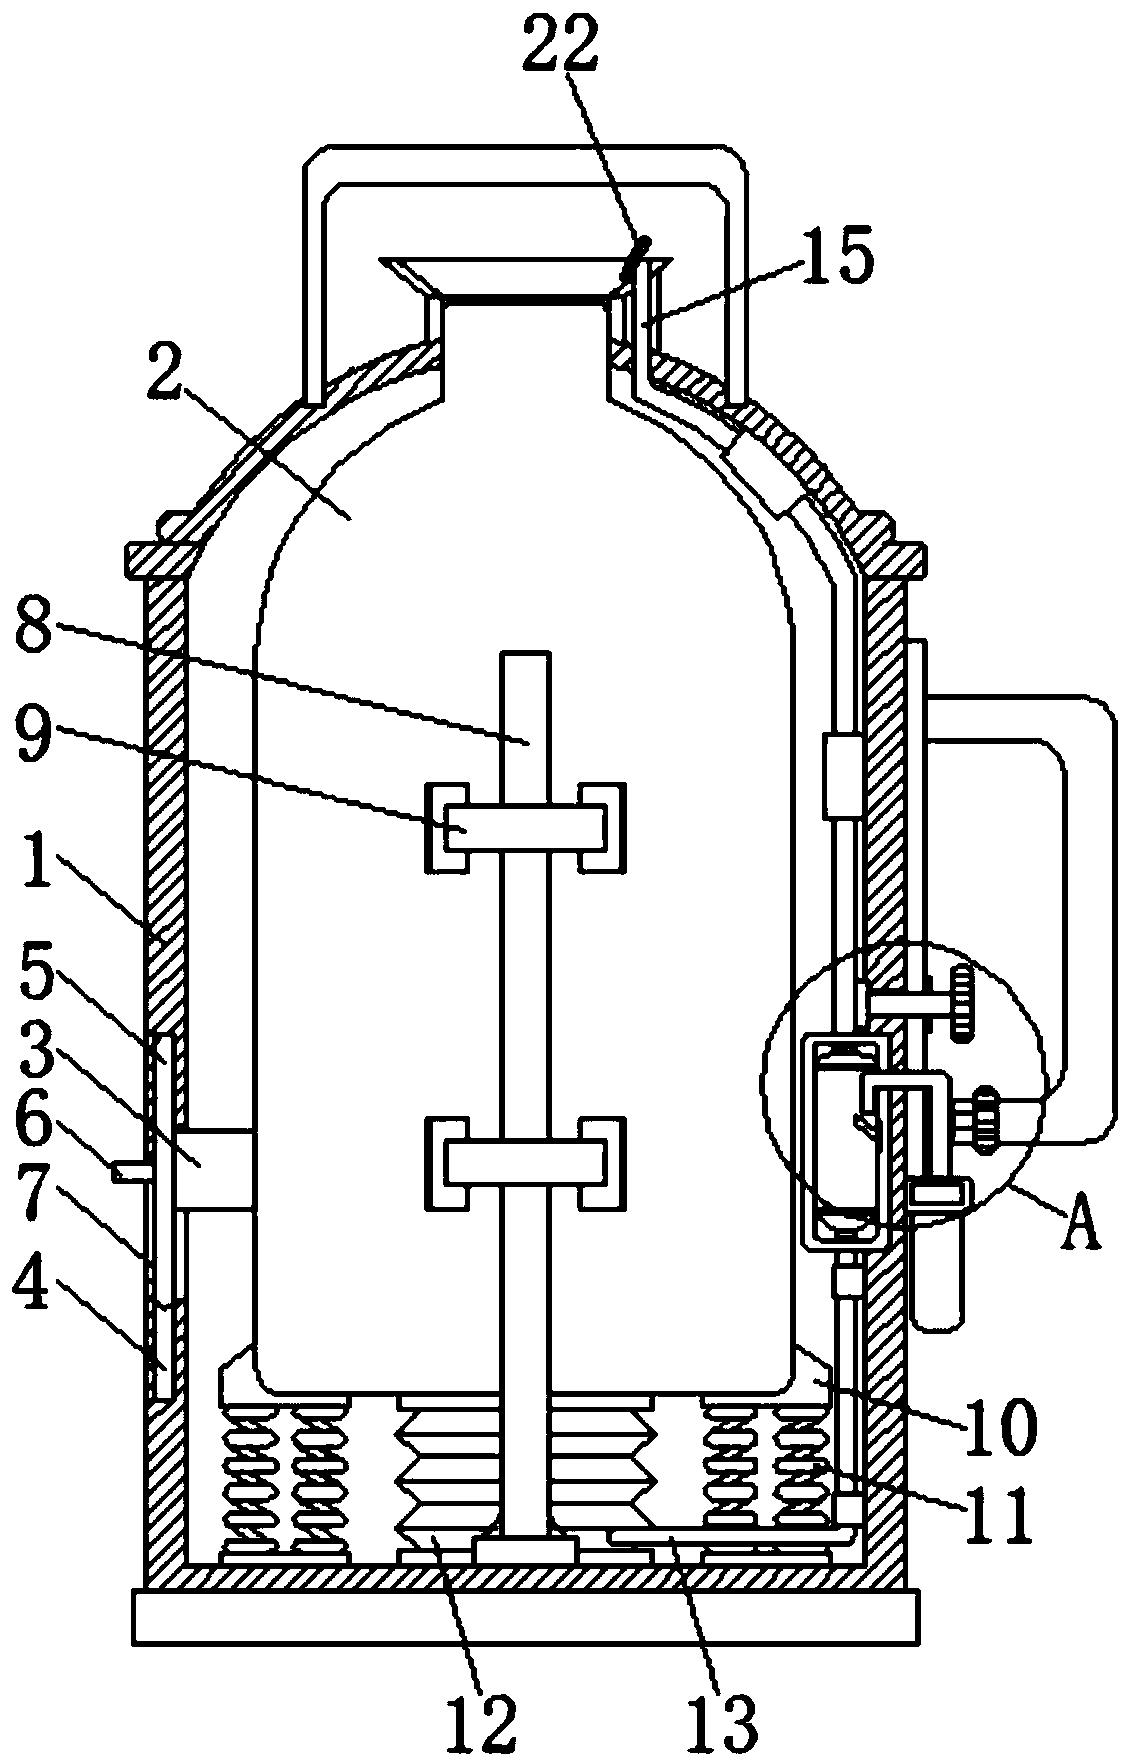 Thermos bottle capable of preventing hot steam from being released from bottle mouth to scald user's hand during irrigation